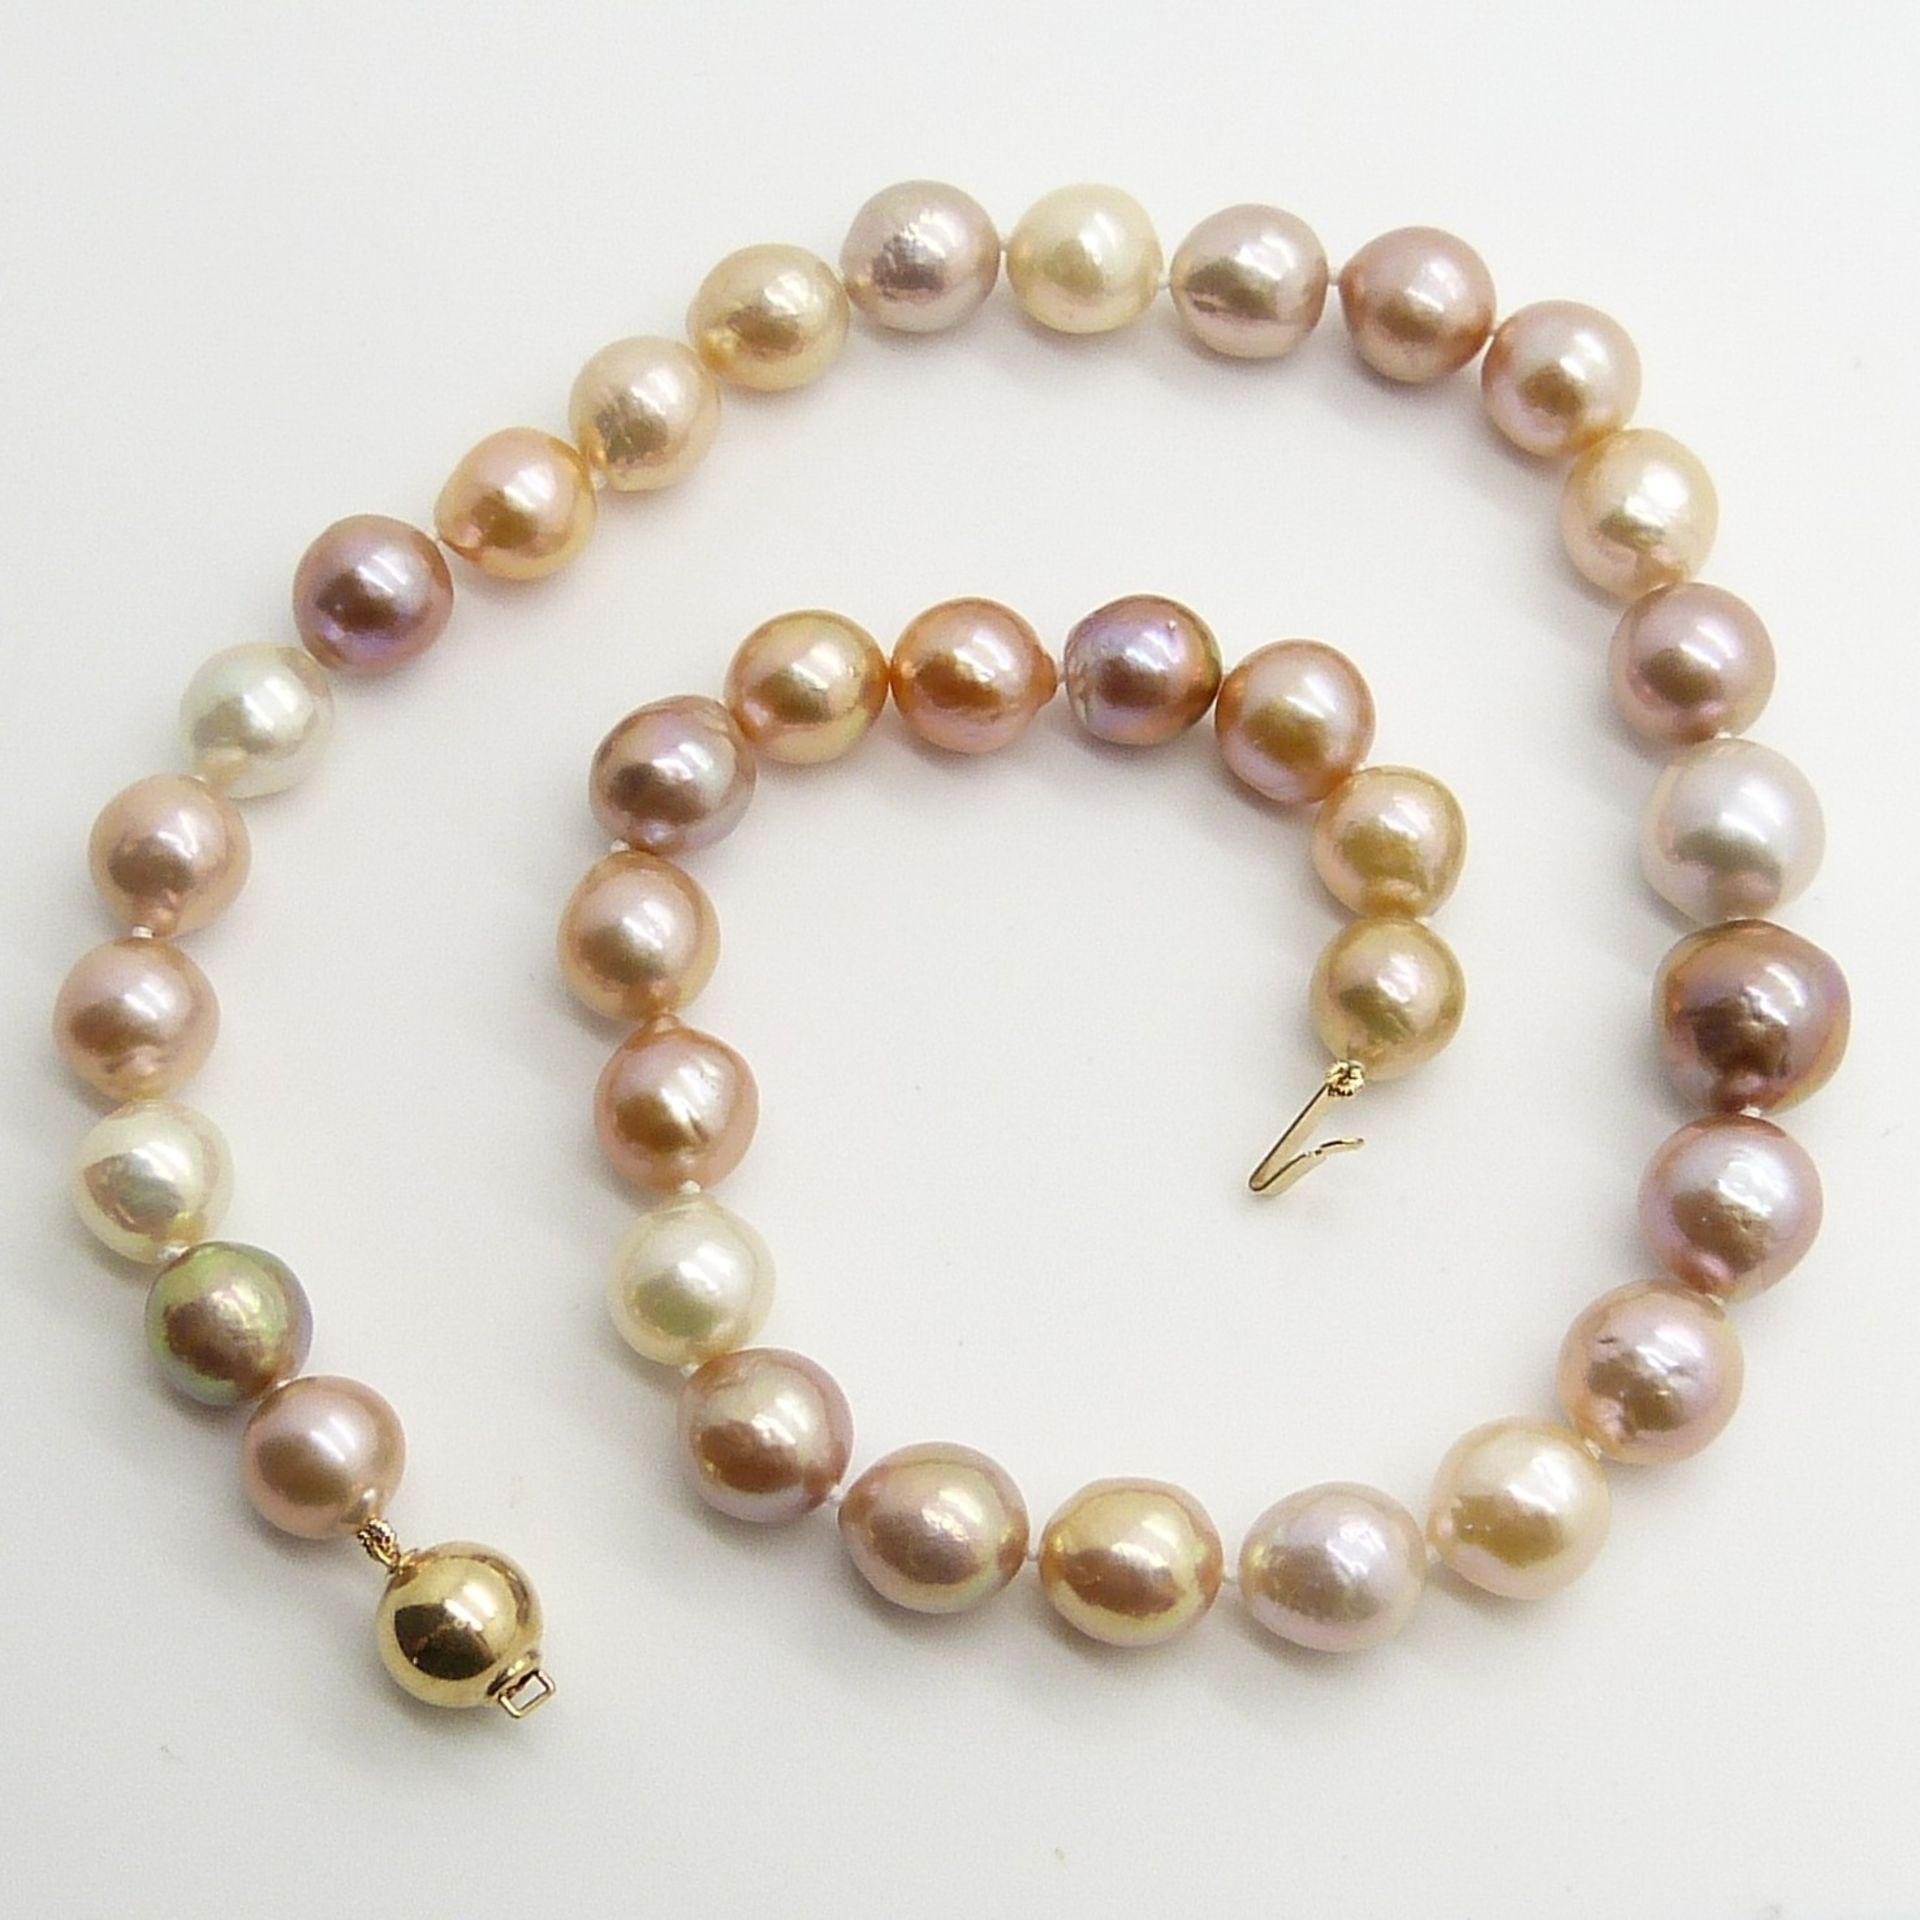 A necklace strung with peach, white, champagne and grey freshwater pearls with 9ct yellow gold clasp - Image 2 of 6